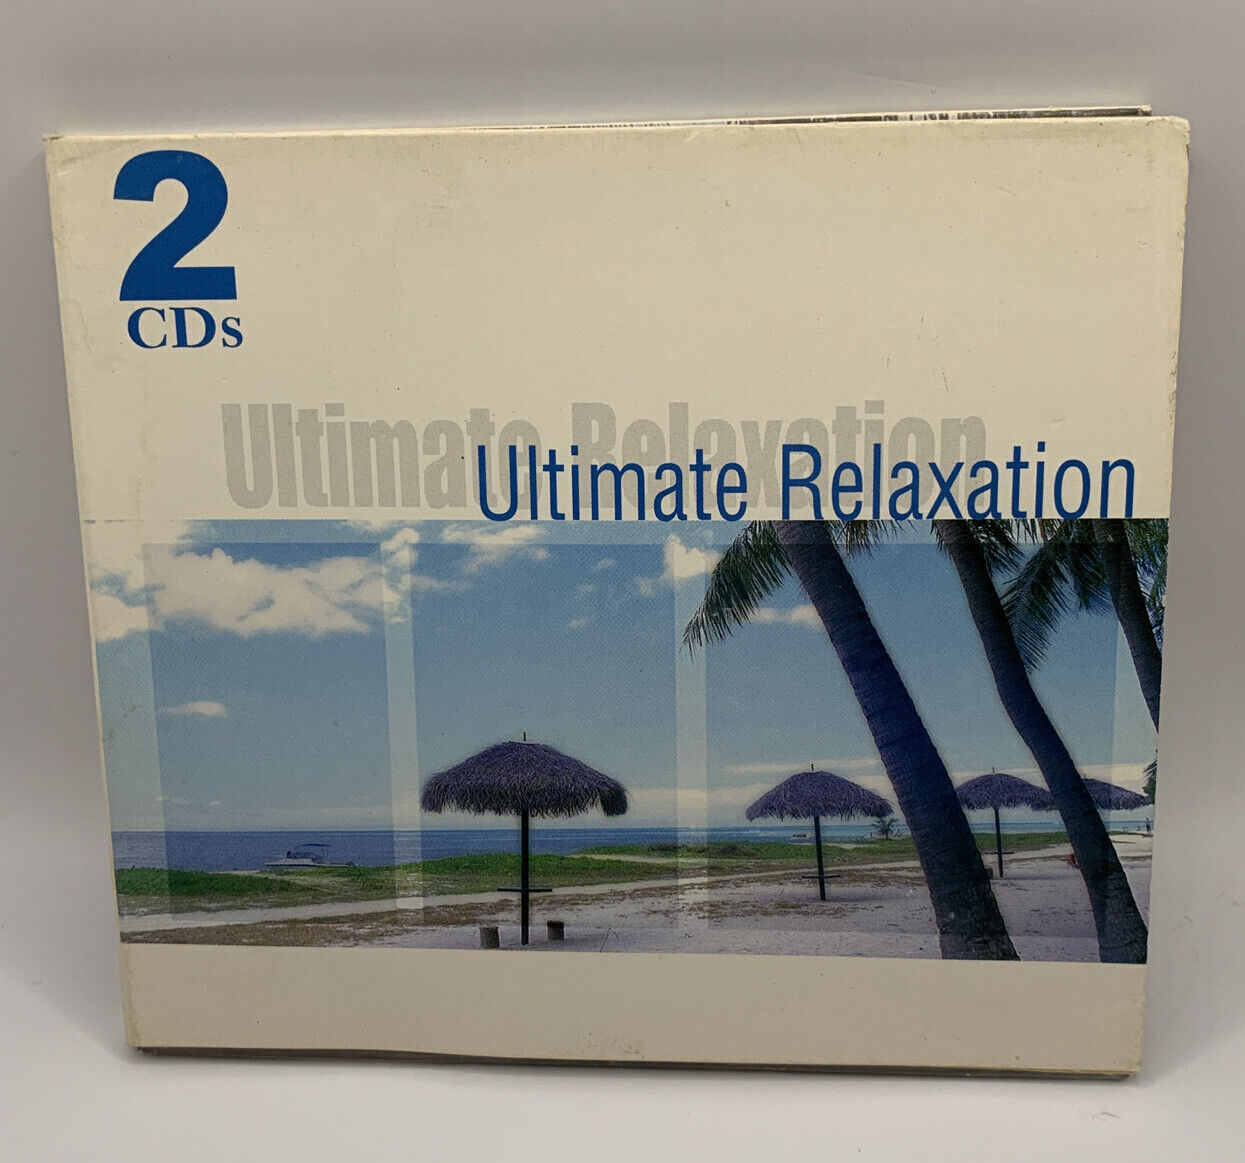 Ultimate Relaxation - Audio CD By Ultimate Relaxation